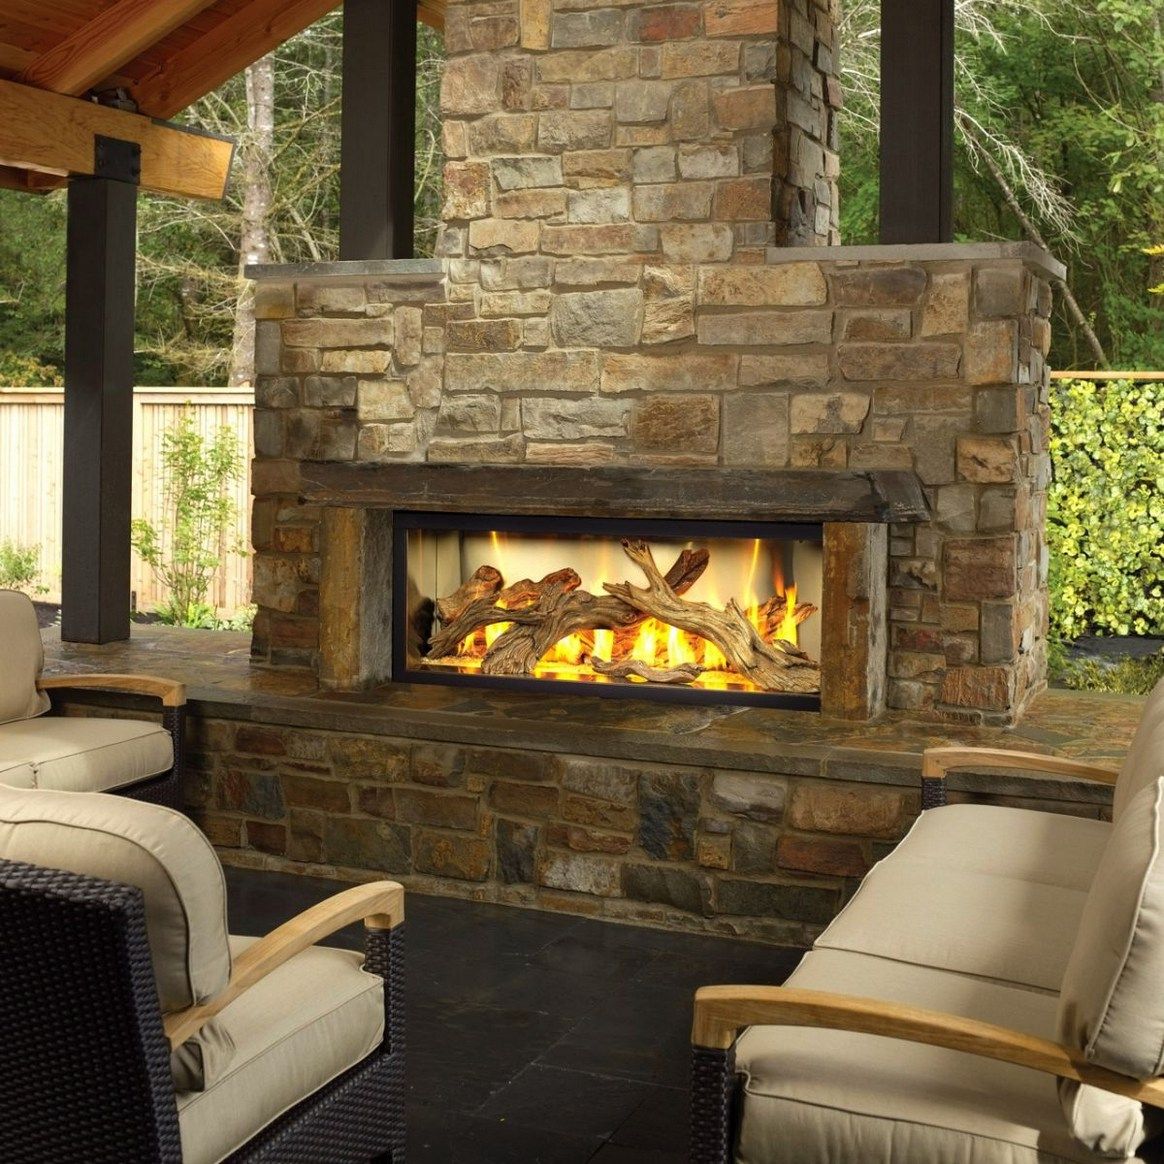 Outdoor Linear Gas Fireplace Fresh Luxury Outdoor Chat area Massive Stone Faced Outdoor Gas